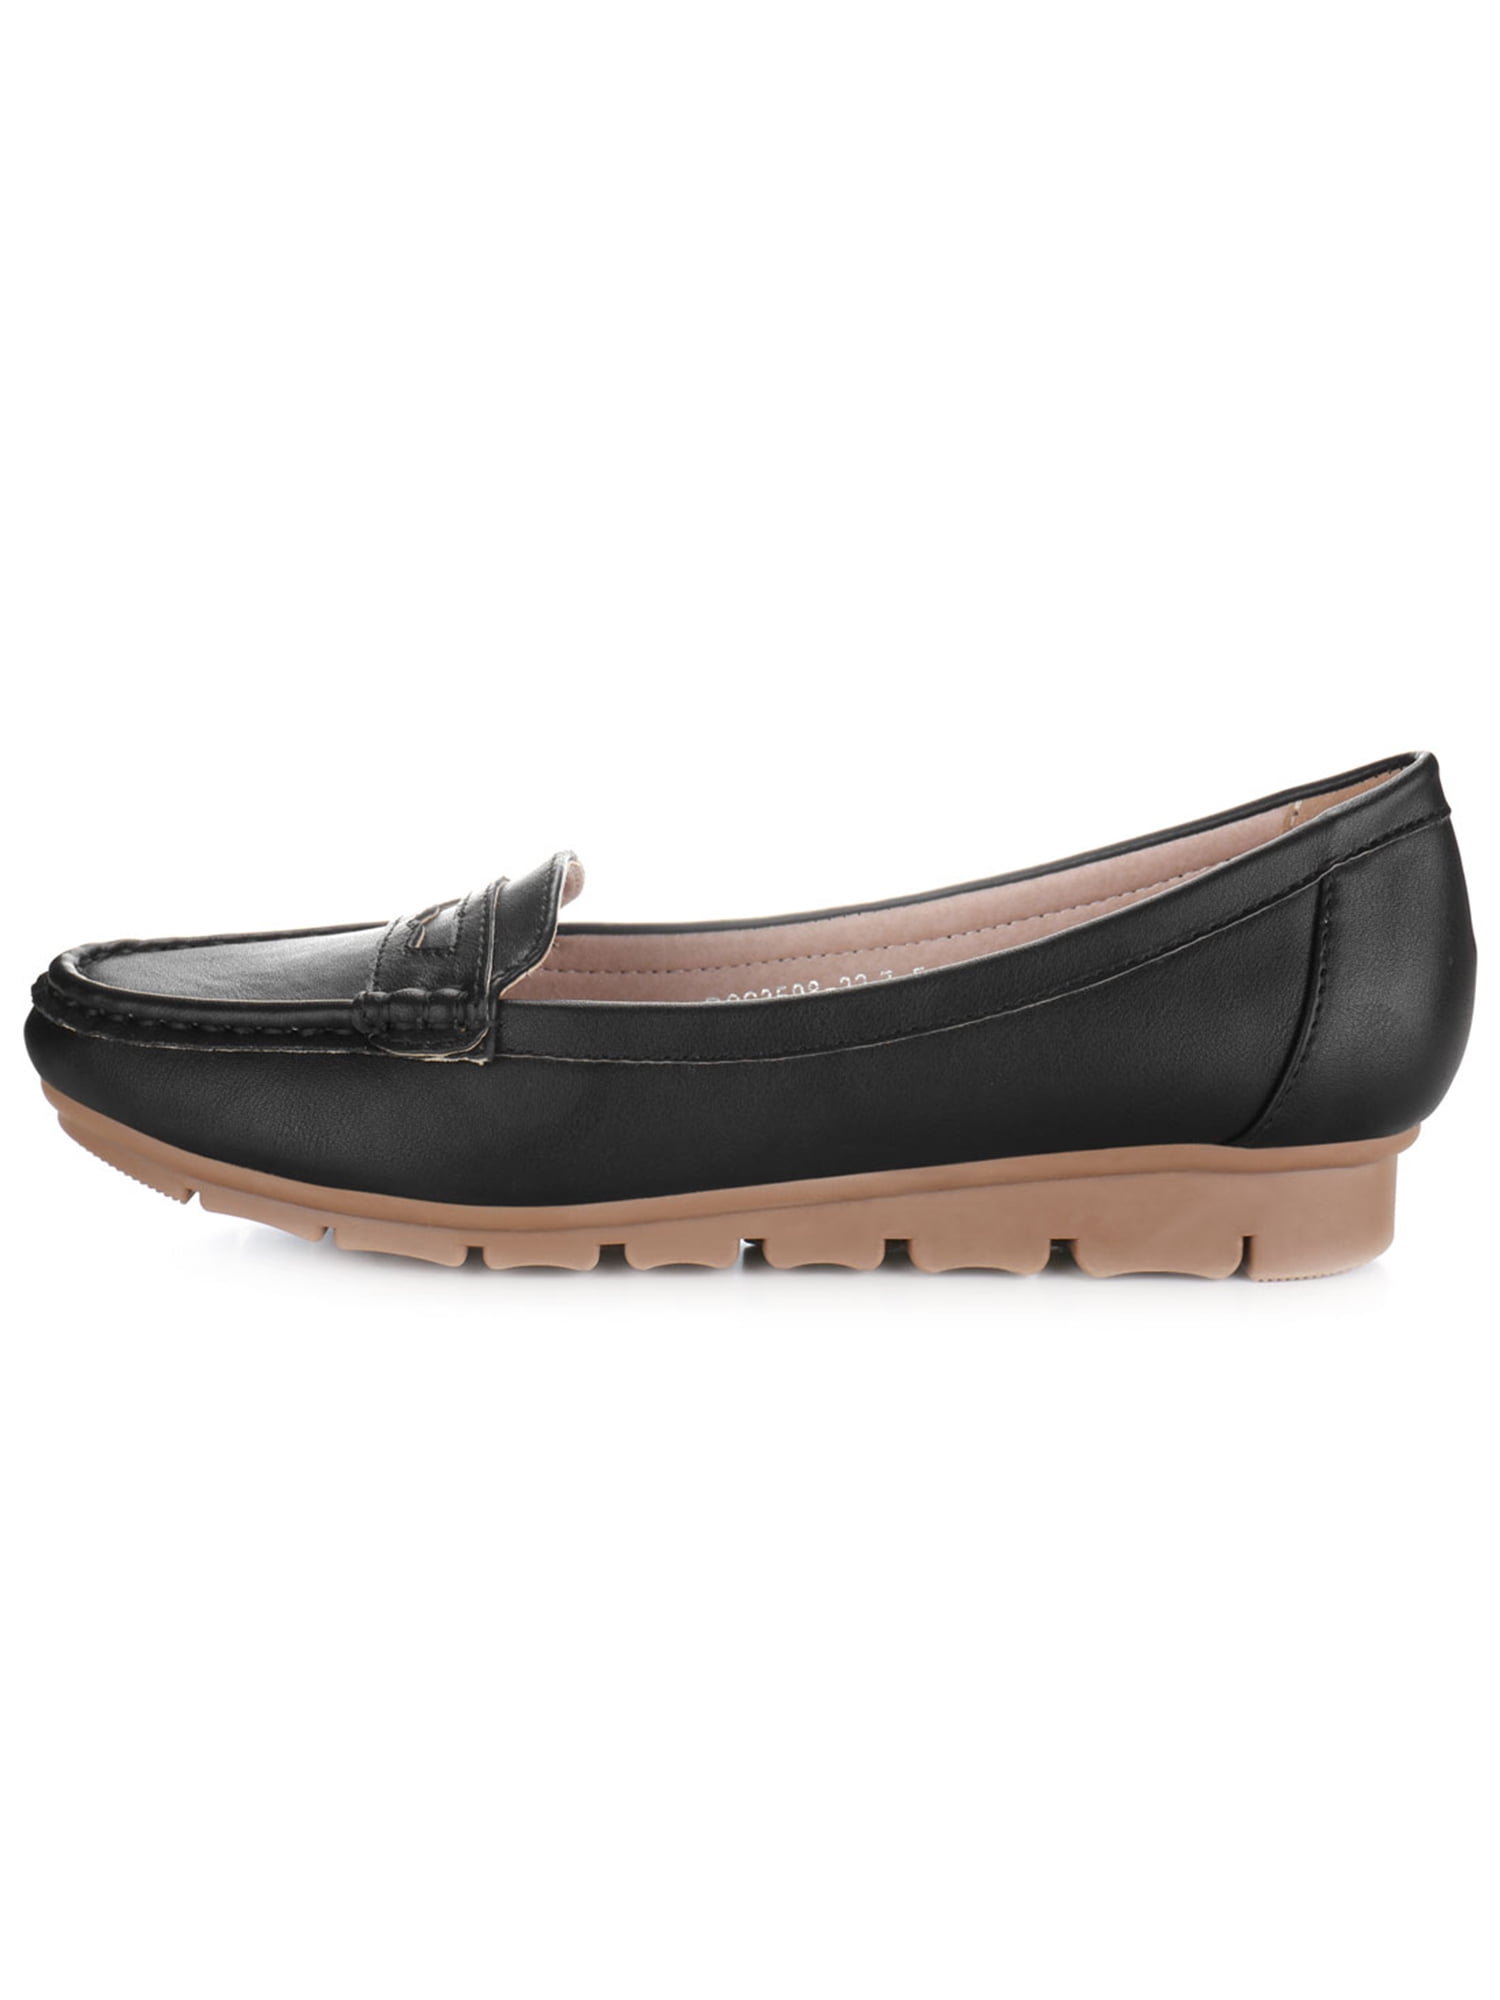 Women Rounded Toe Strap Front Detail Slip-On Loafers Black US 7 ...